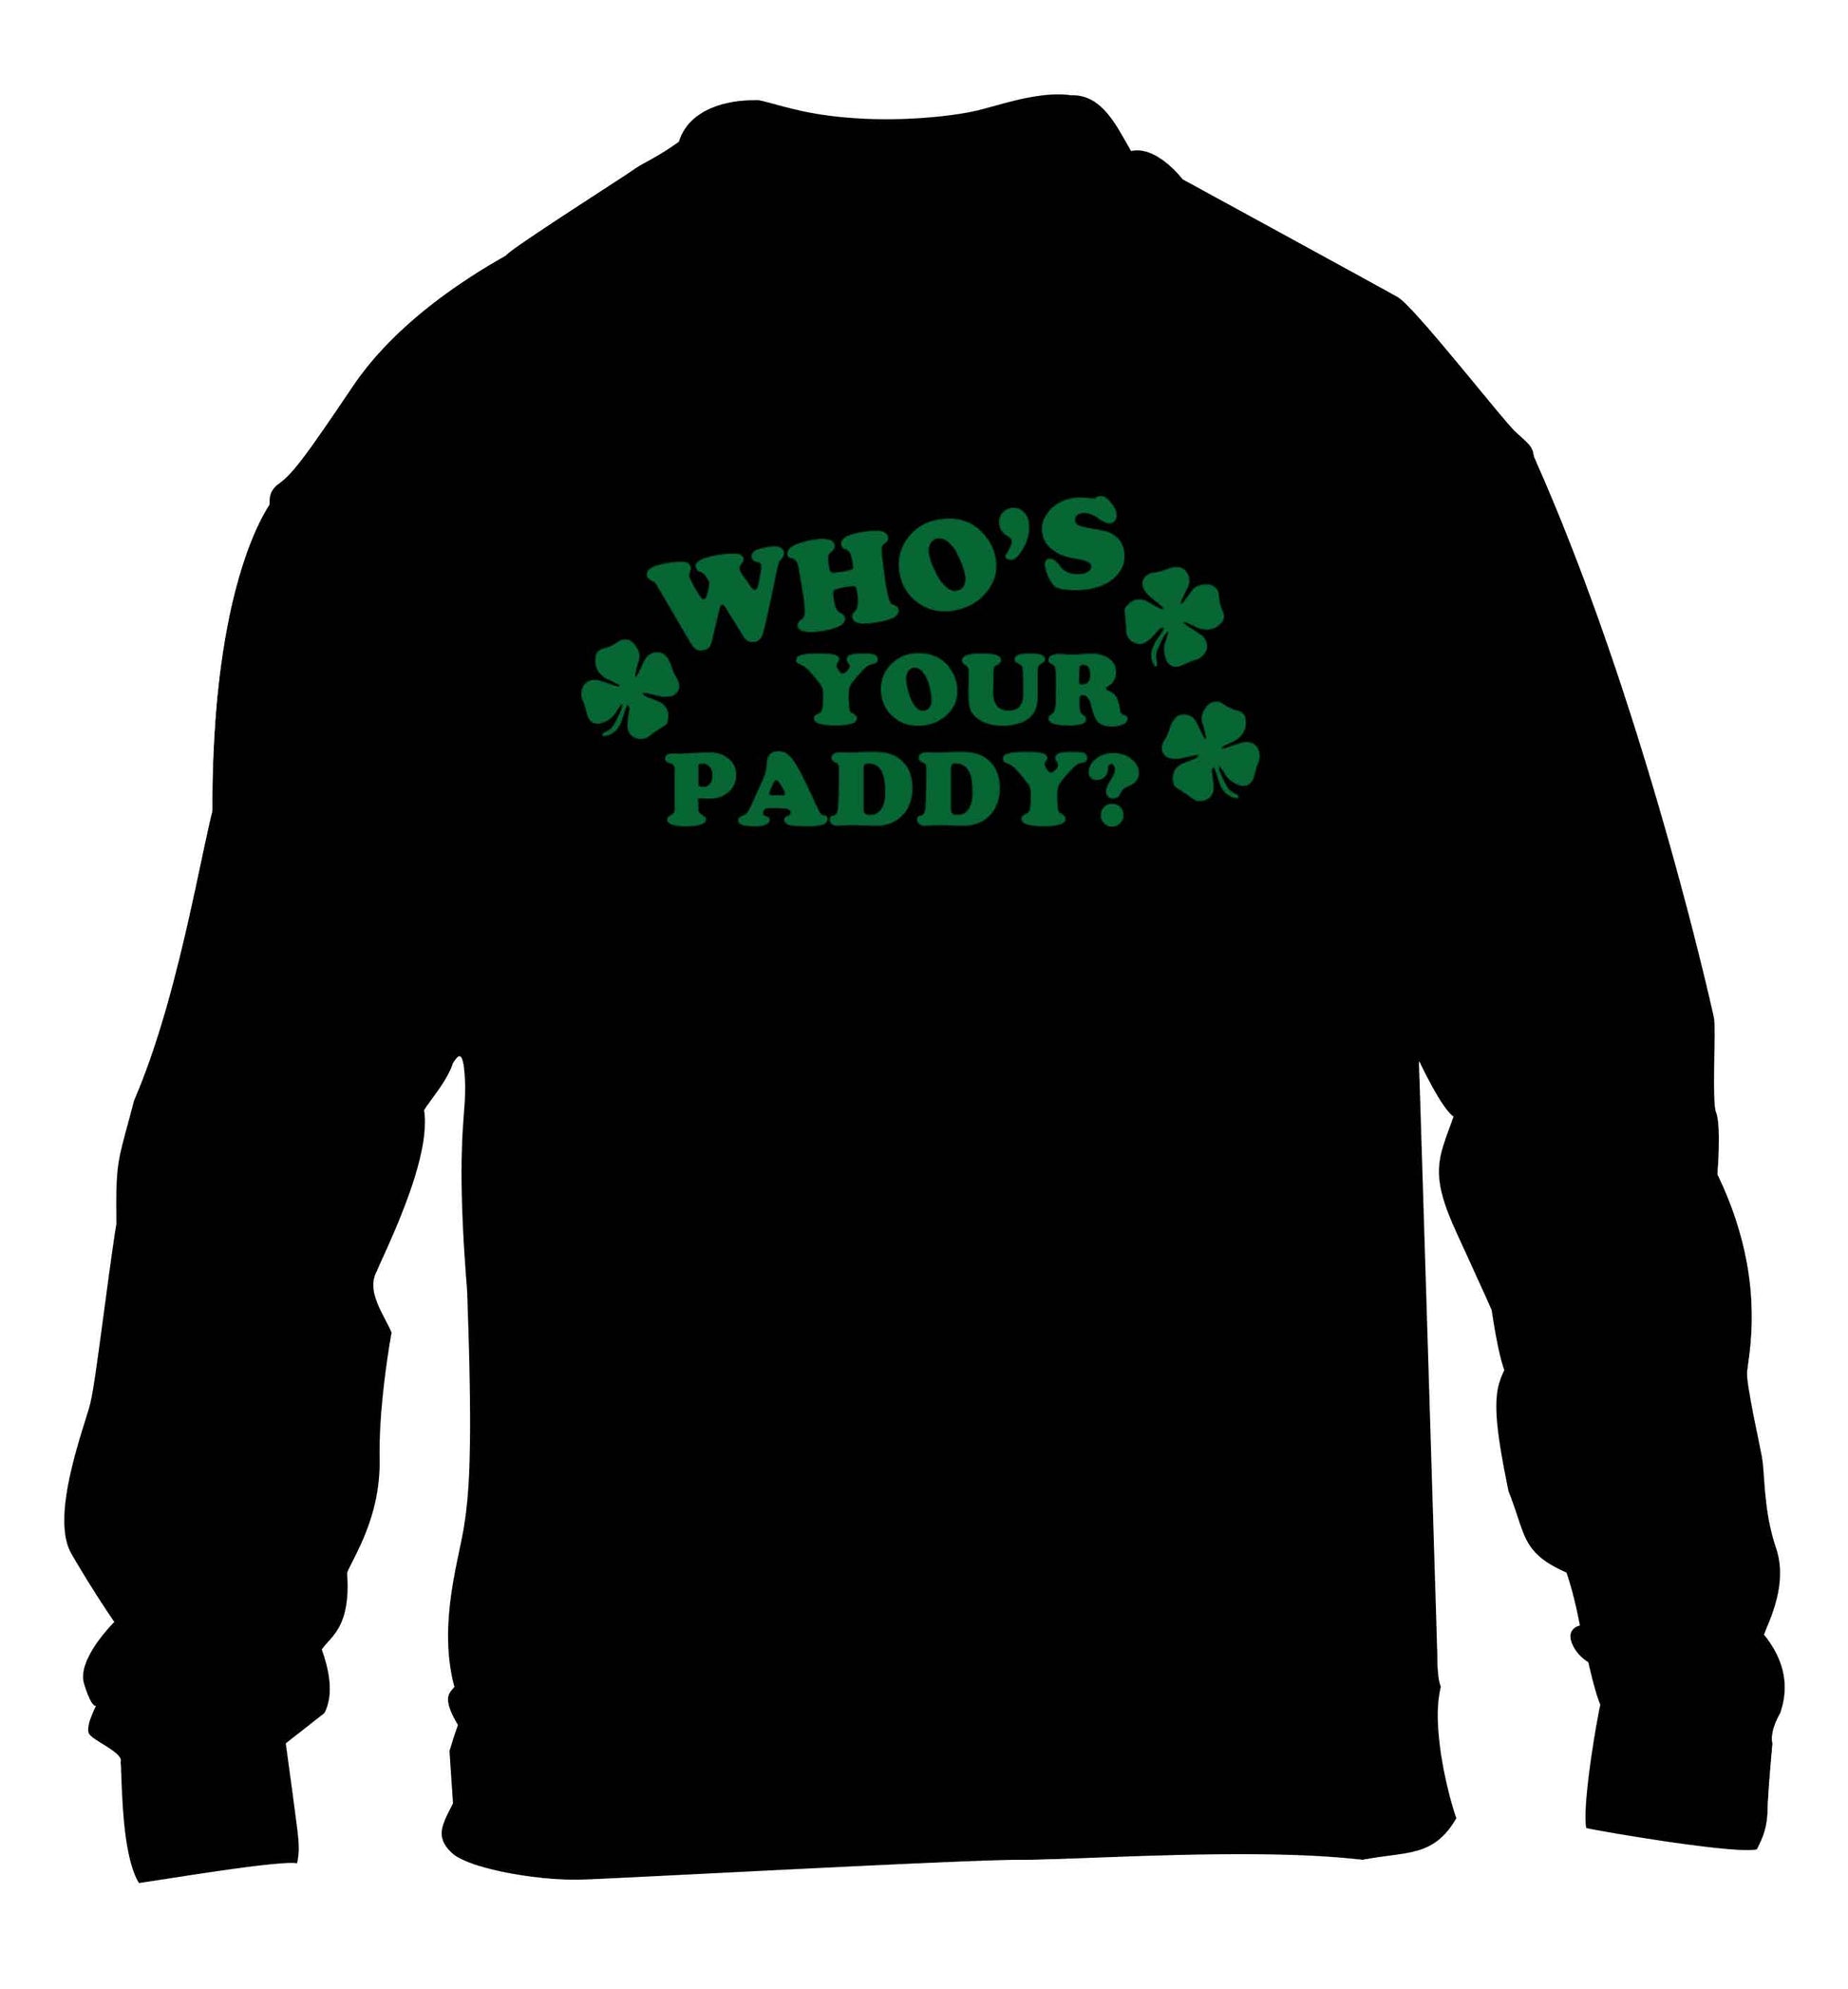 Who's your paddy? children's black sweater 12-13 Years